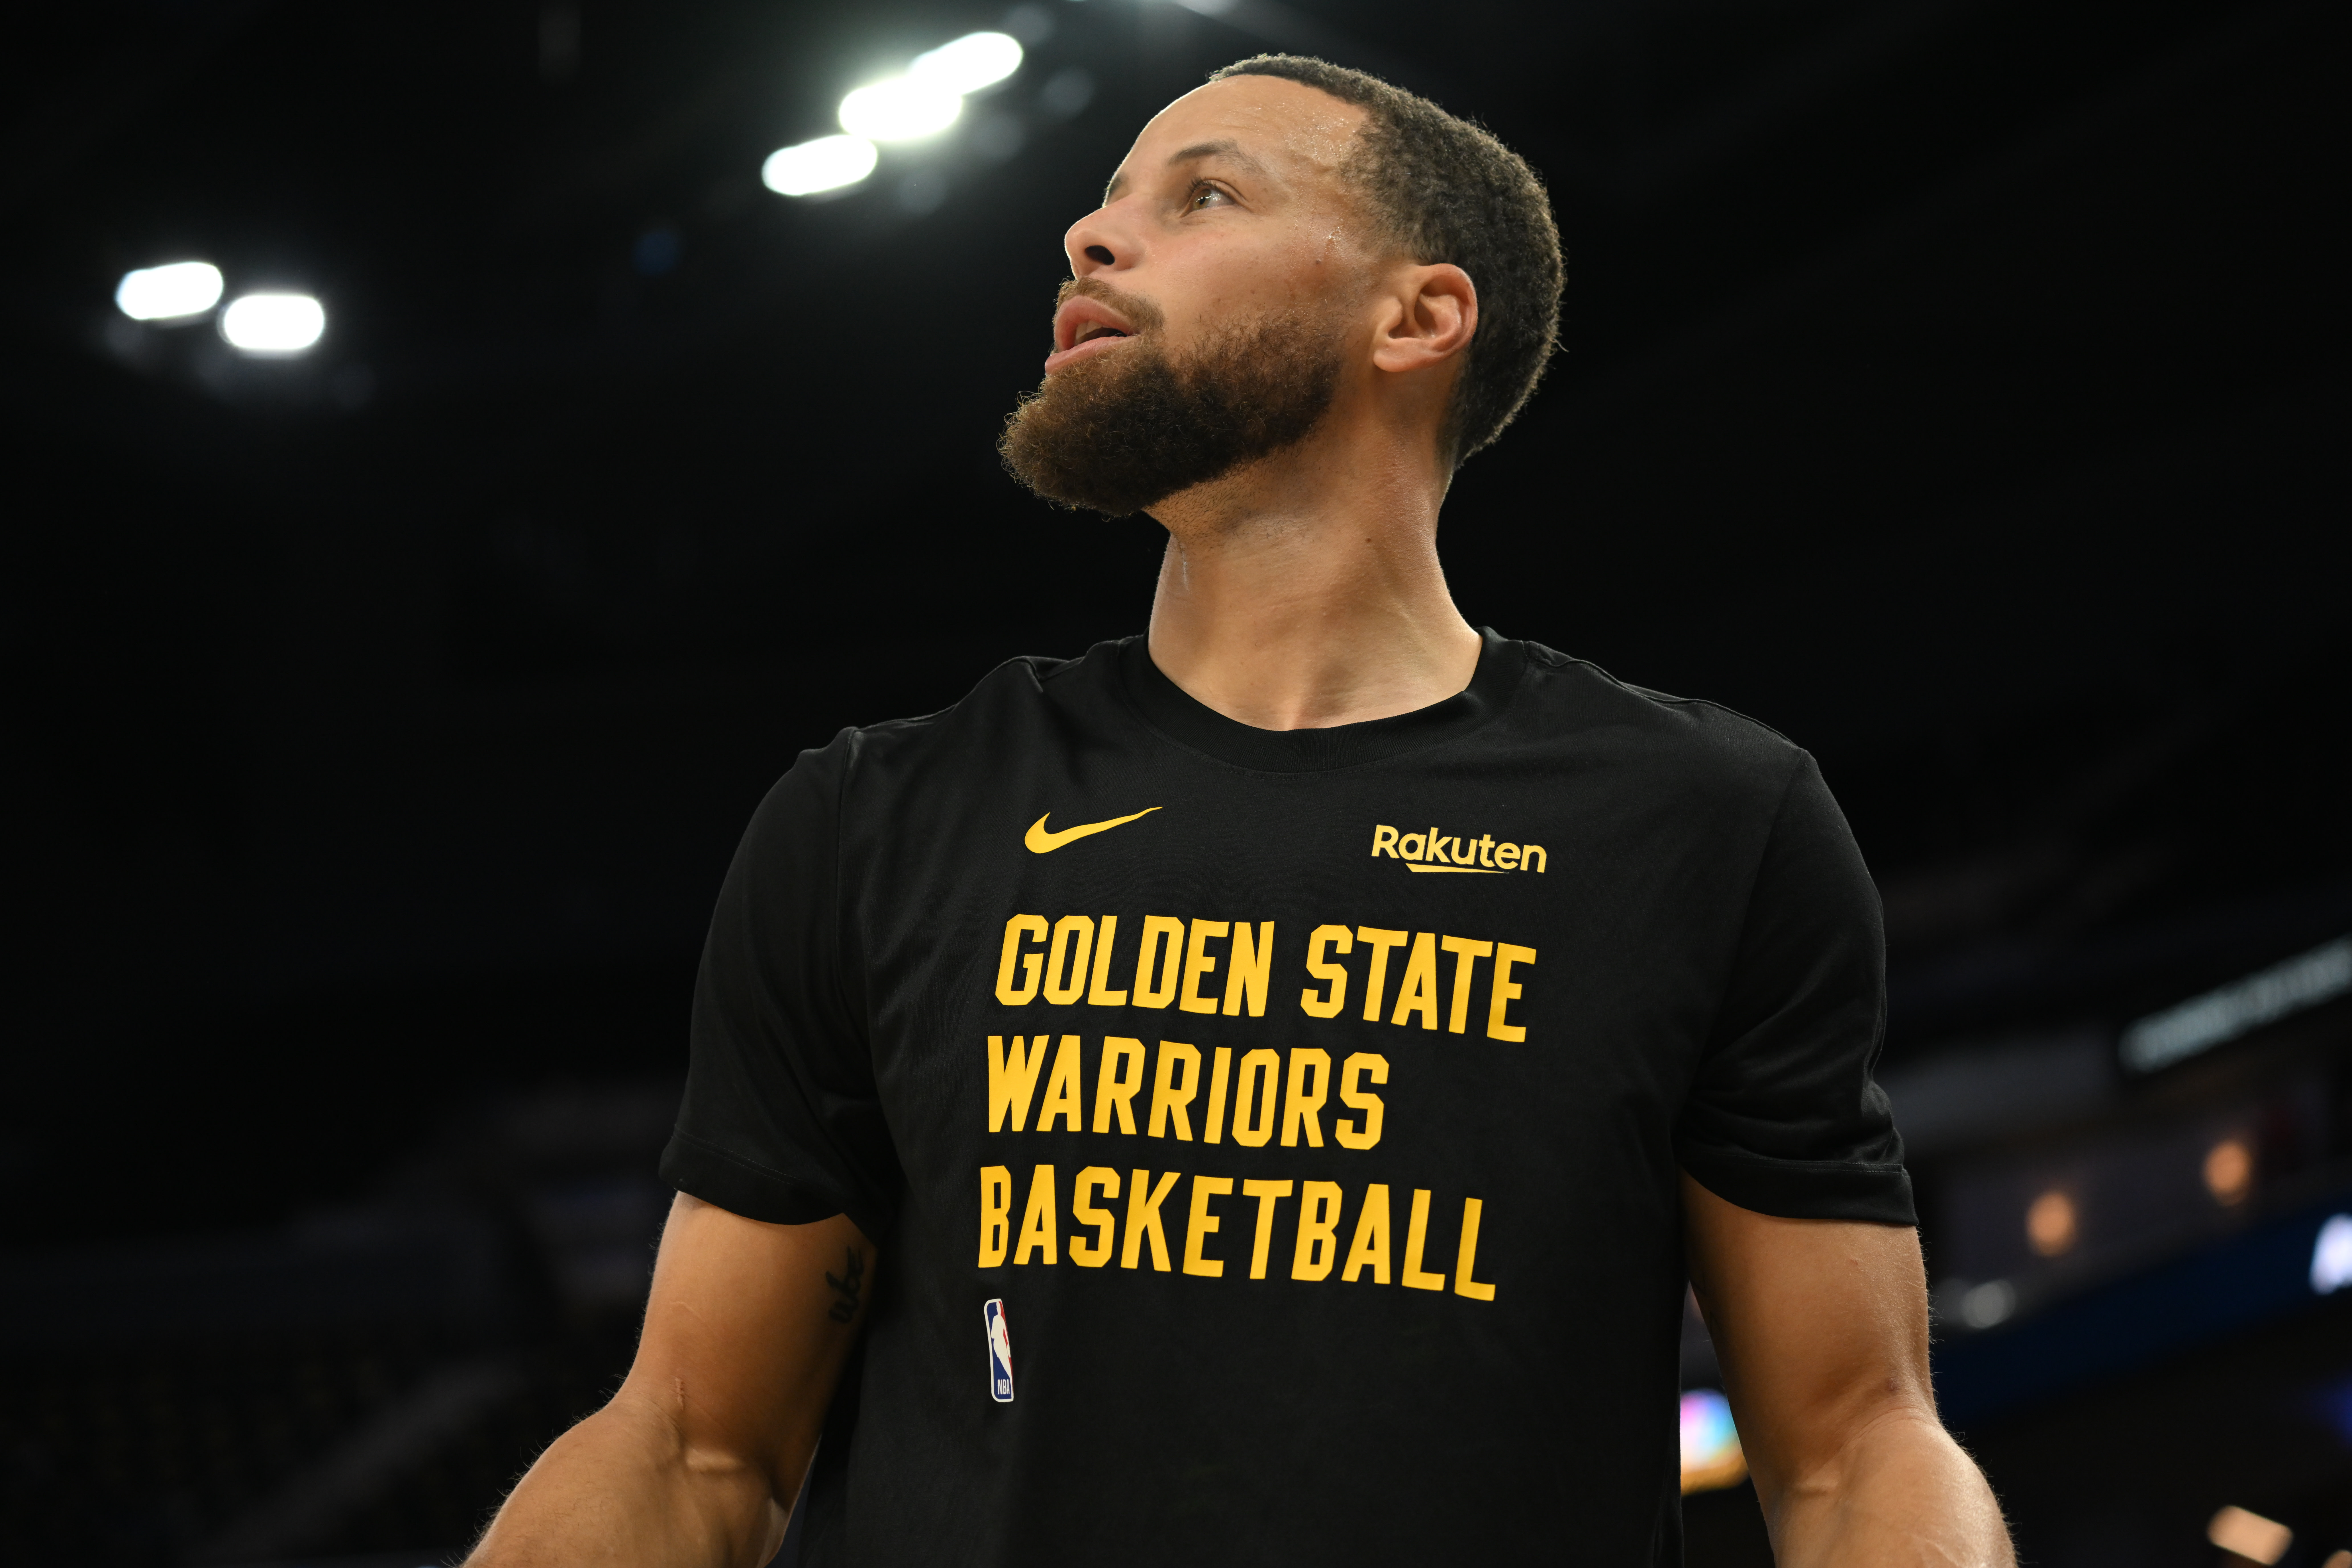 NBA Rumors: Warriors' Stephen Curry to Miss 'A Game or Few Games